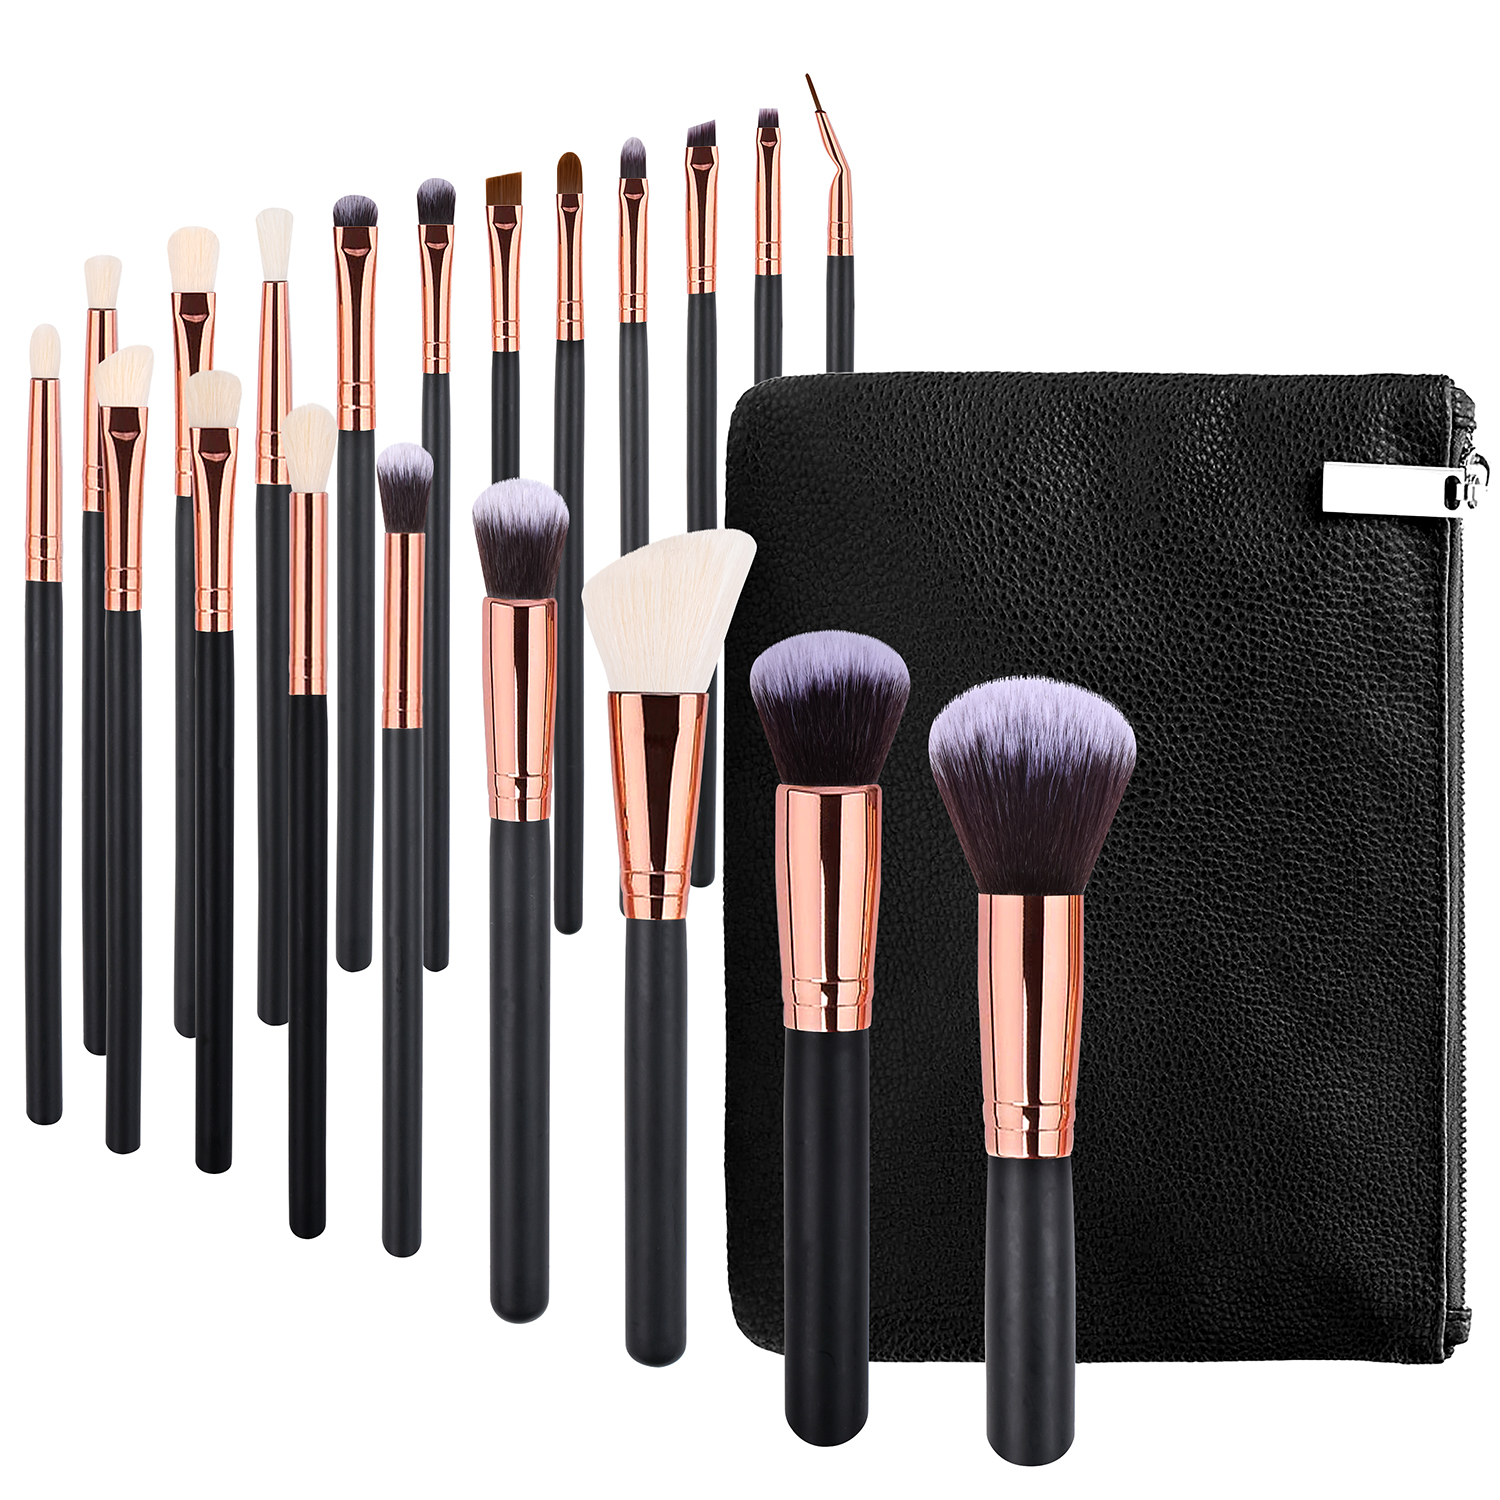 2021 Cosmetic Tools Hot Sale Private Label Normal Powder Eye 20 Pieces Brush Makeup Set